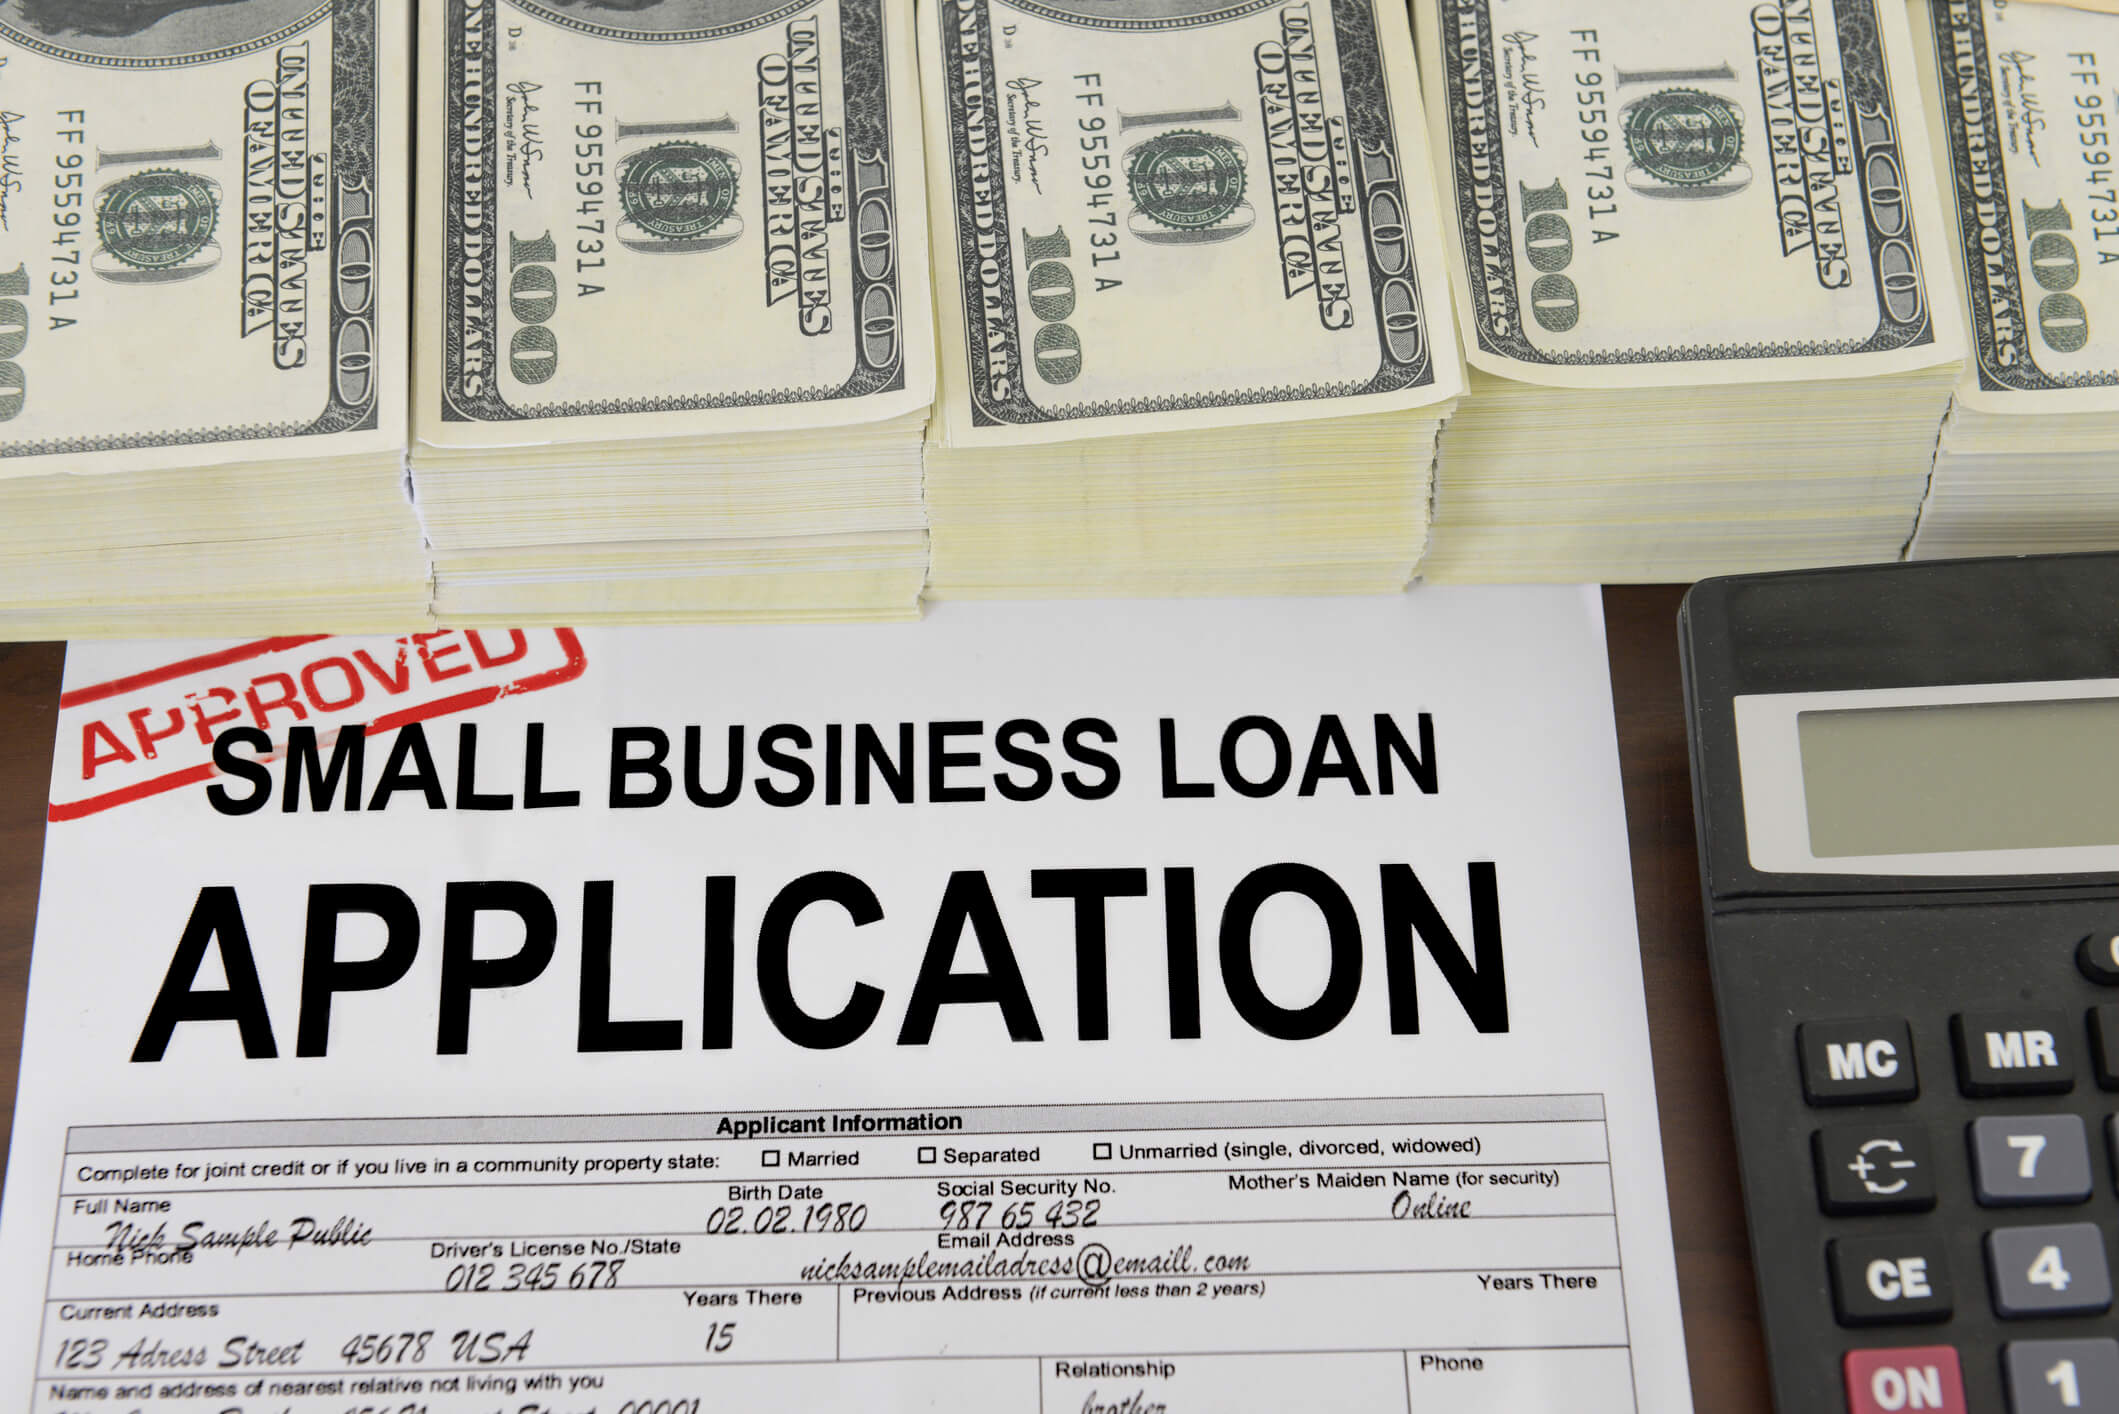 Small Business Loans - Complete Controller